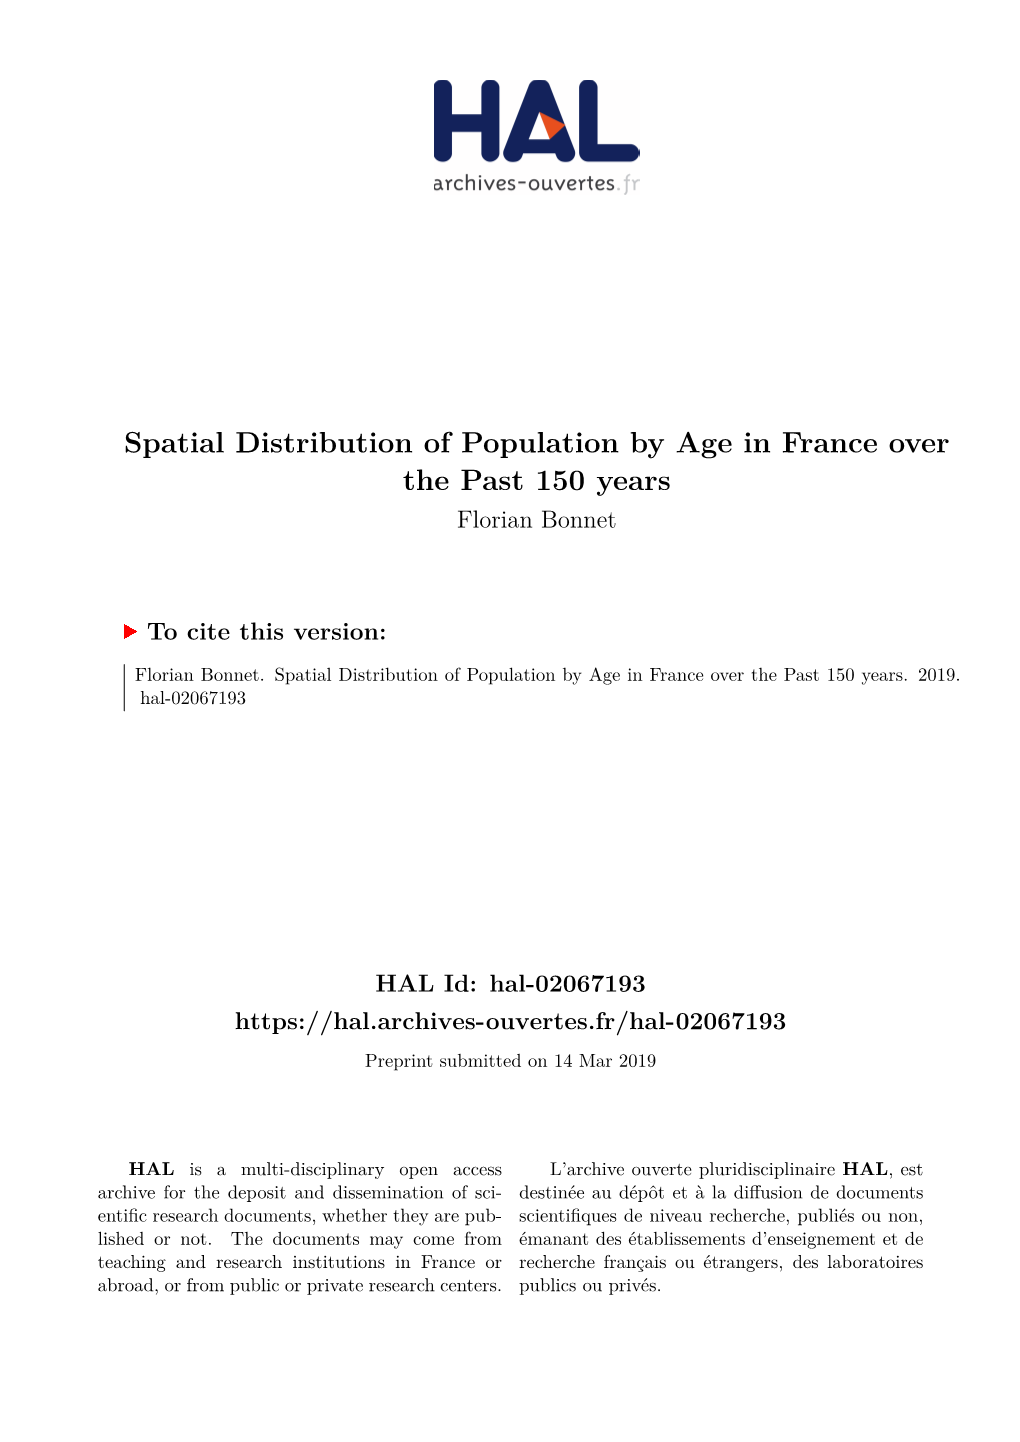 Spatial Distribution of Population by Age in France Over the Past 150 Years Florian Bonnet